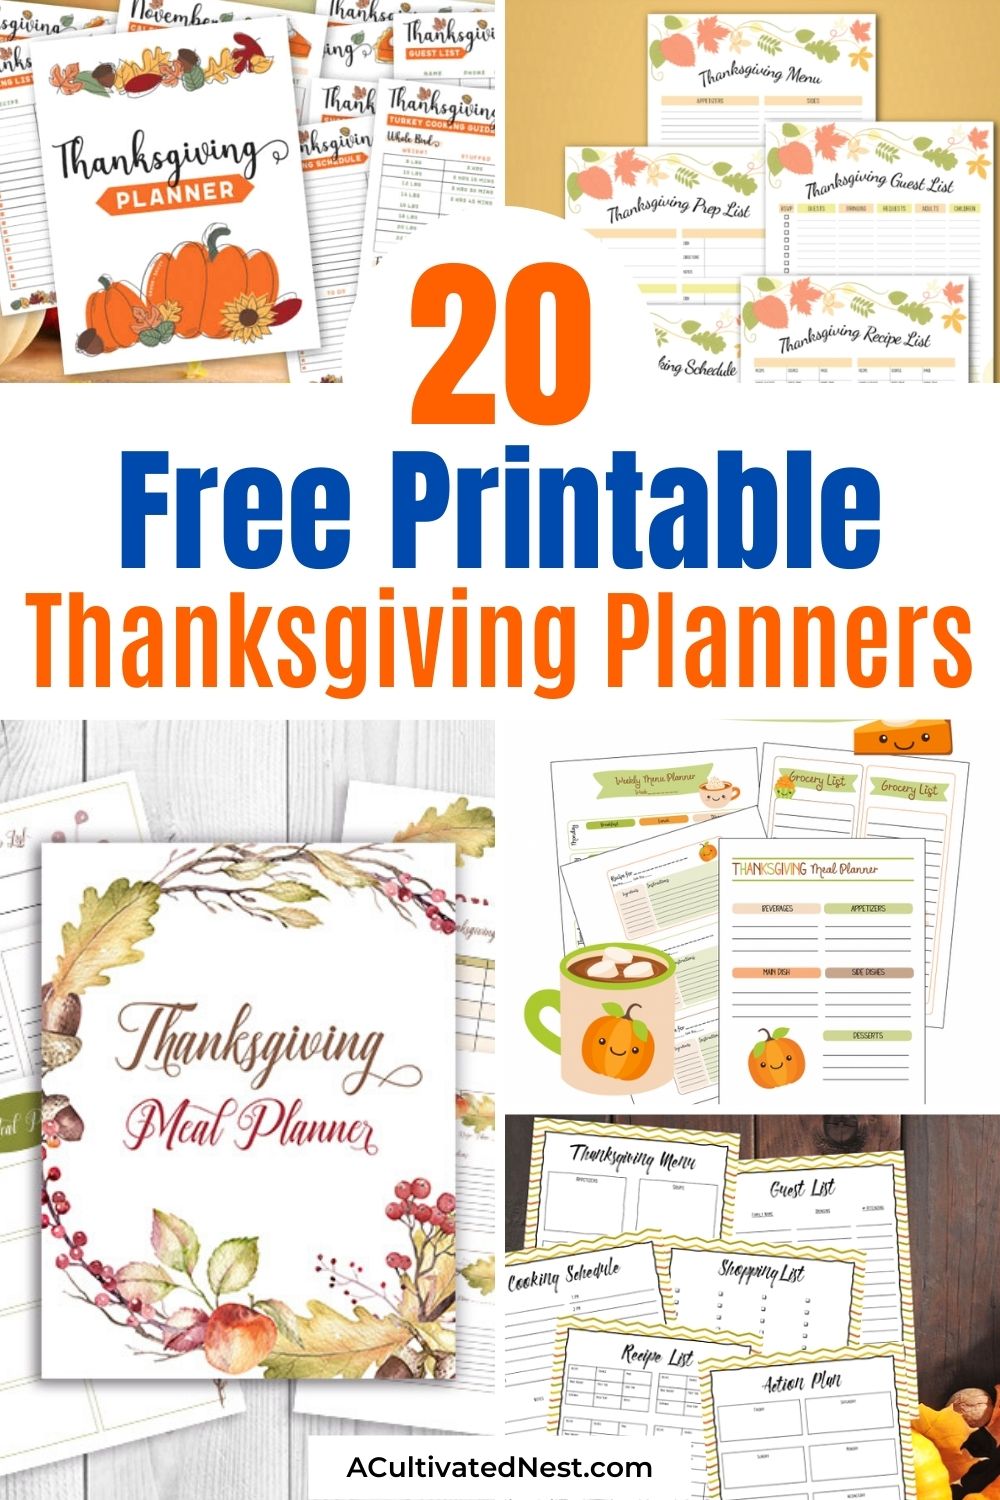 20 Free Thanksgiving Planner Printables- If you want to have a stress-free and easy Thanksgiving, then you need to plan for it in advance! Check out these free Thanksgiving planner printables that can really help you out! | free Thanksgiving printables, #ThanksgivingMenu #freePrintables #printables #planners #ACultivatedNest